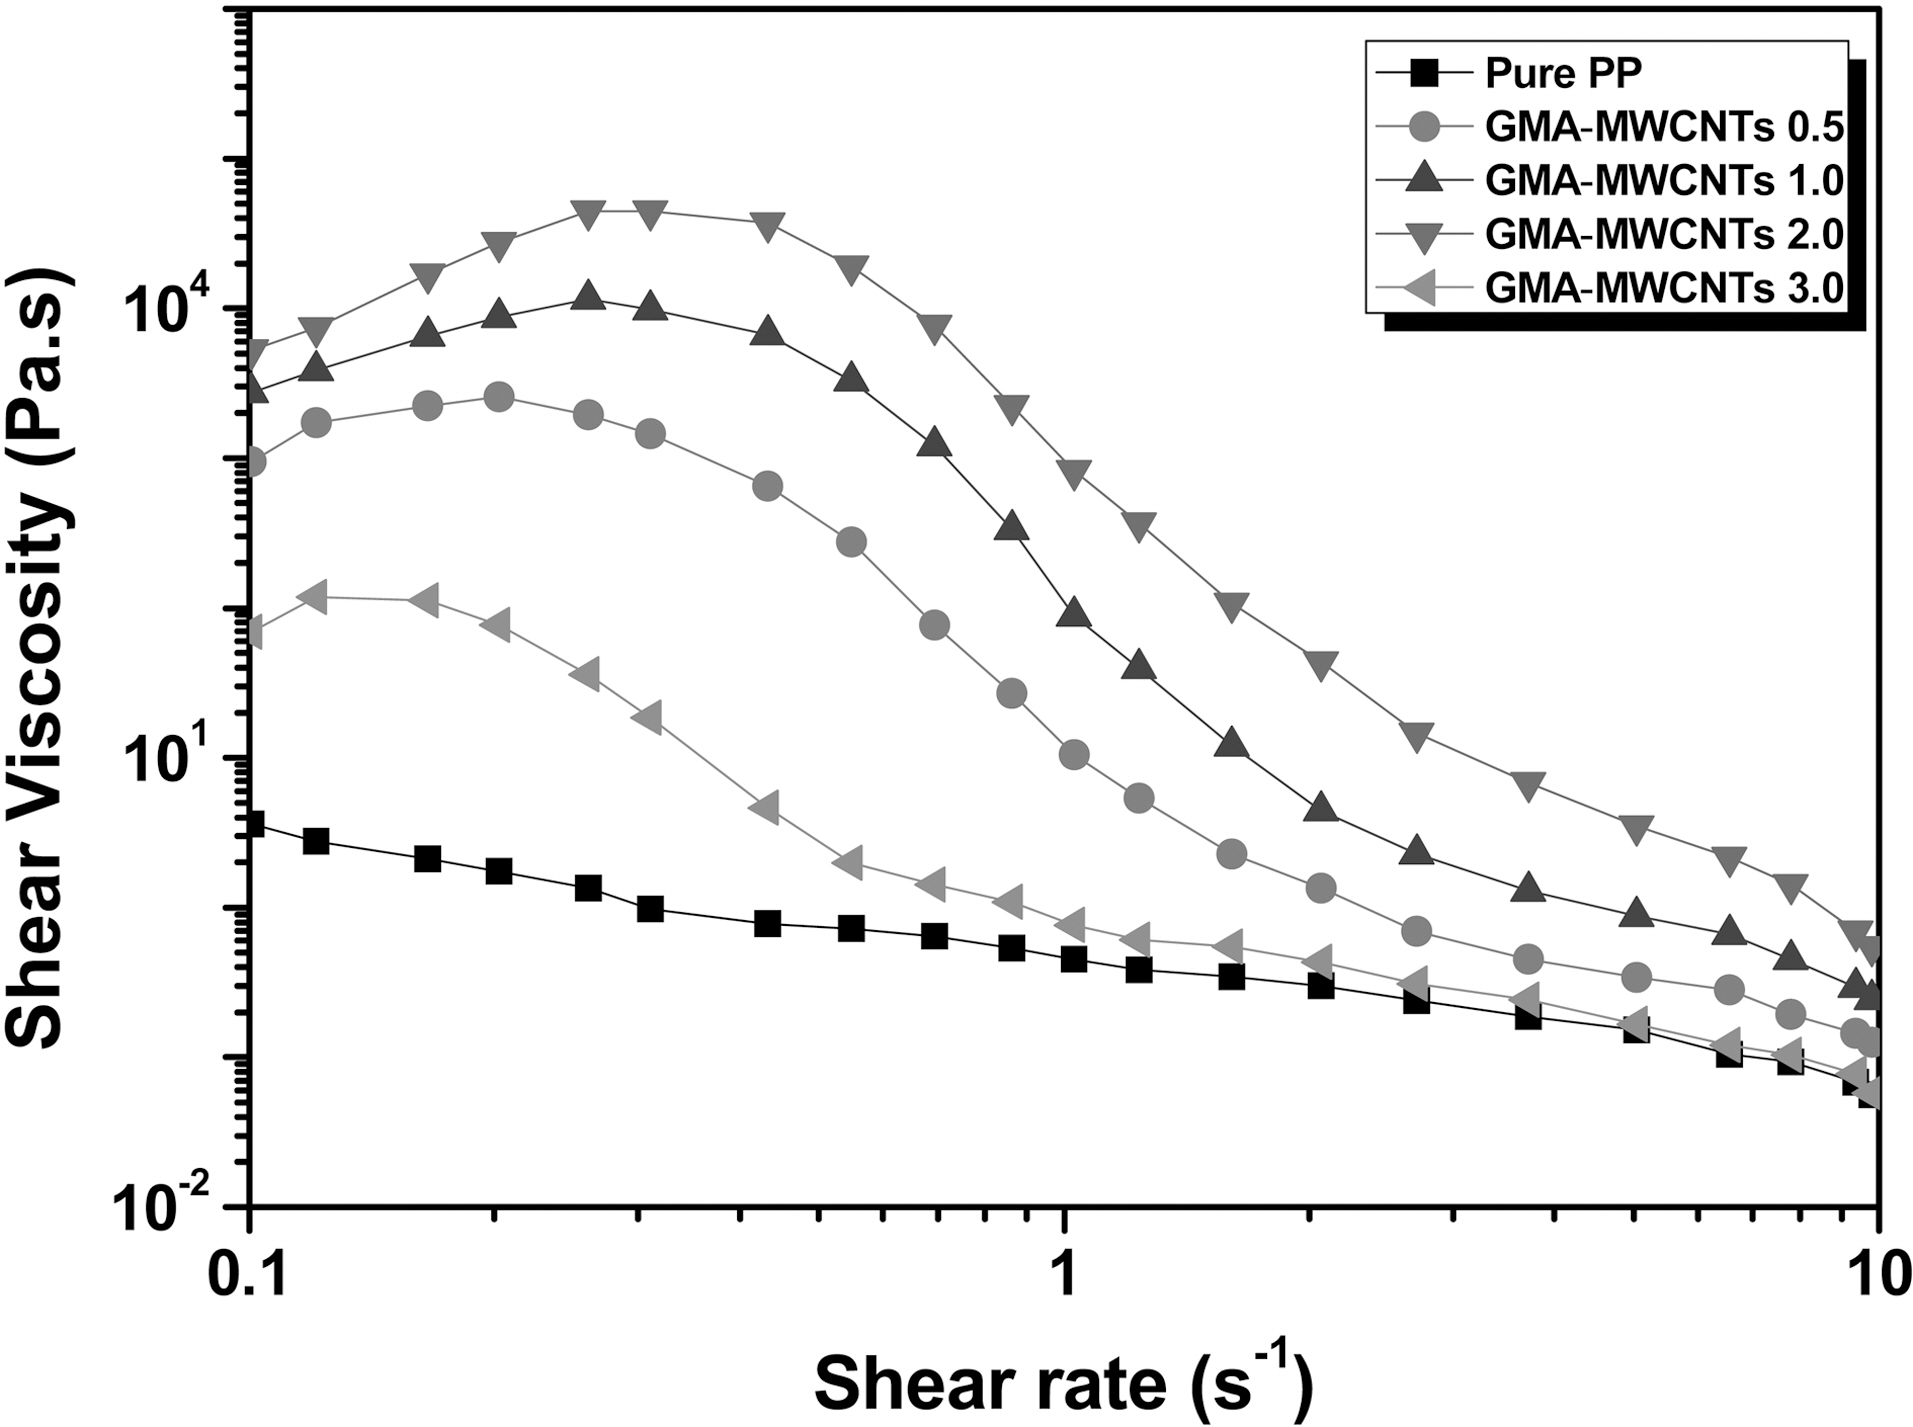 The shear viscosity of GMA-MWCNTs/PP nanocomposites with GMA-MWCNT content.